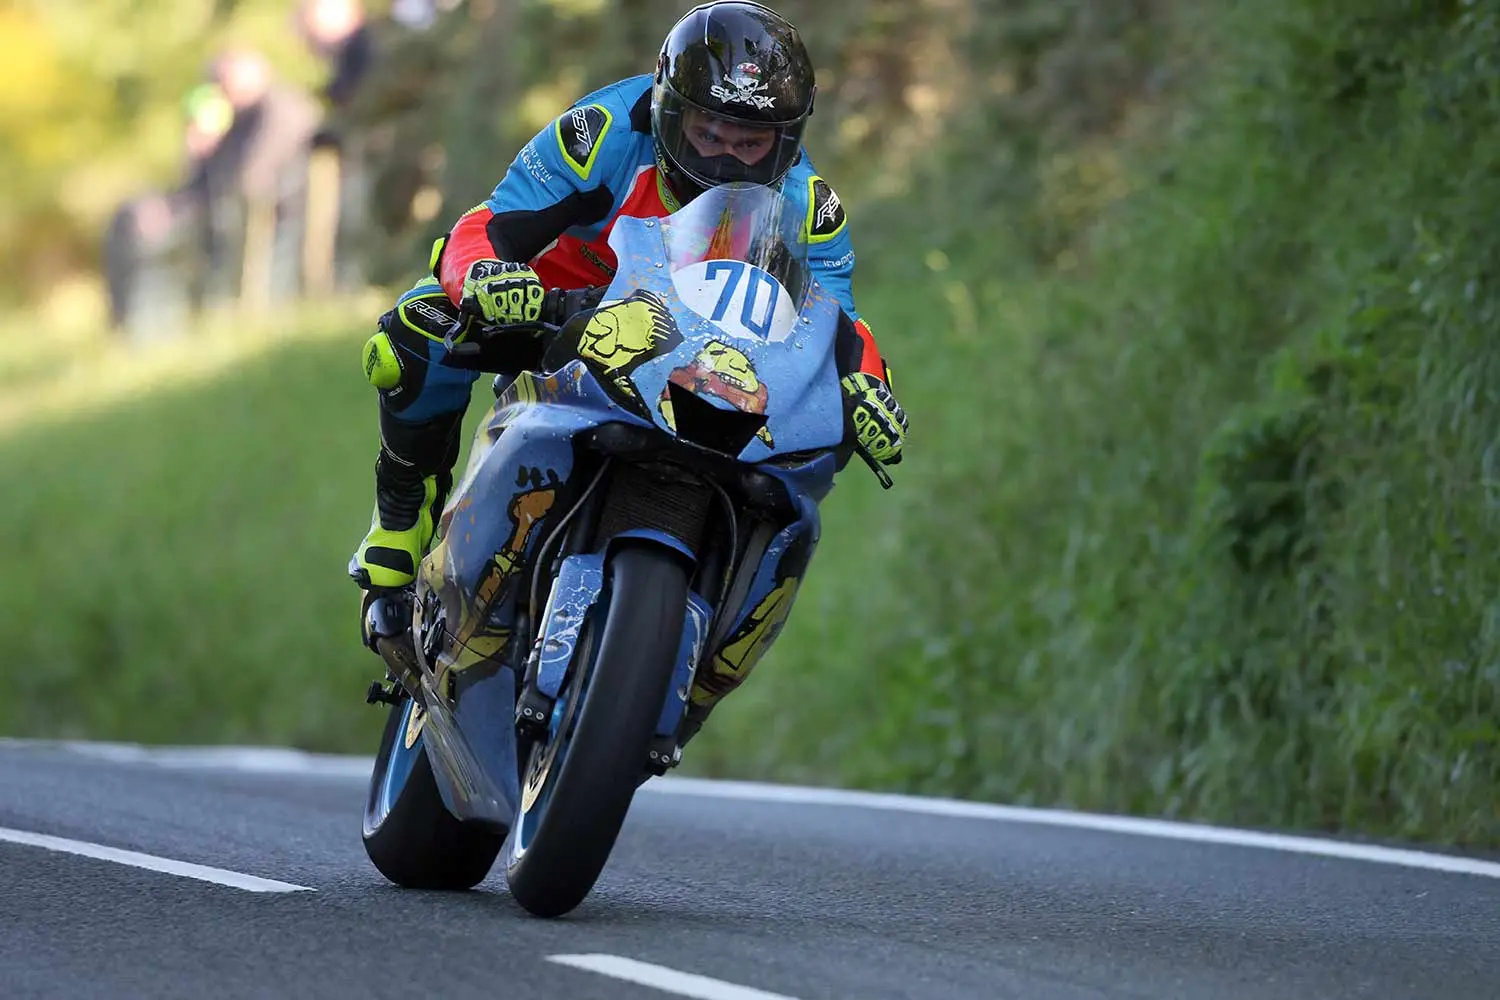 Who Was Mark Purslow Welsh Rider Mark Purslow Accident Video Goes Viral at Isle Of Man TT Videos